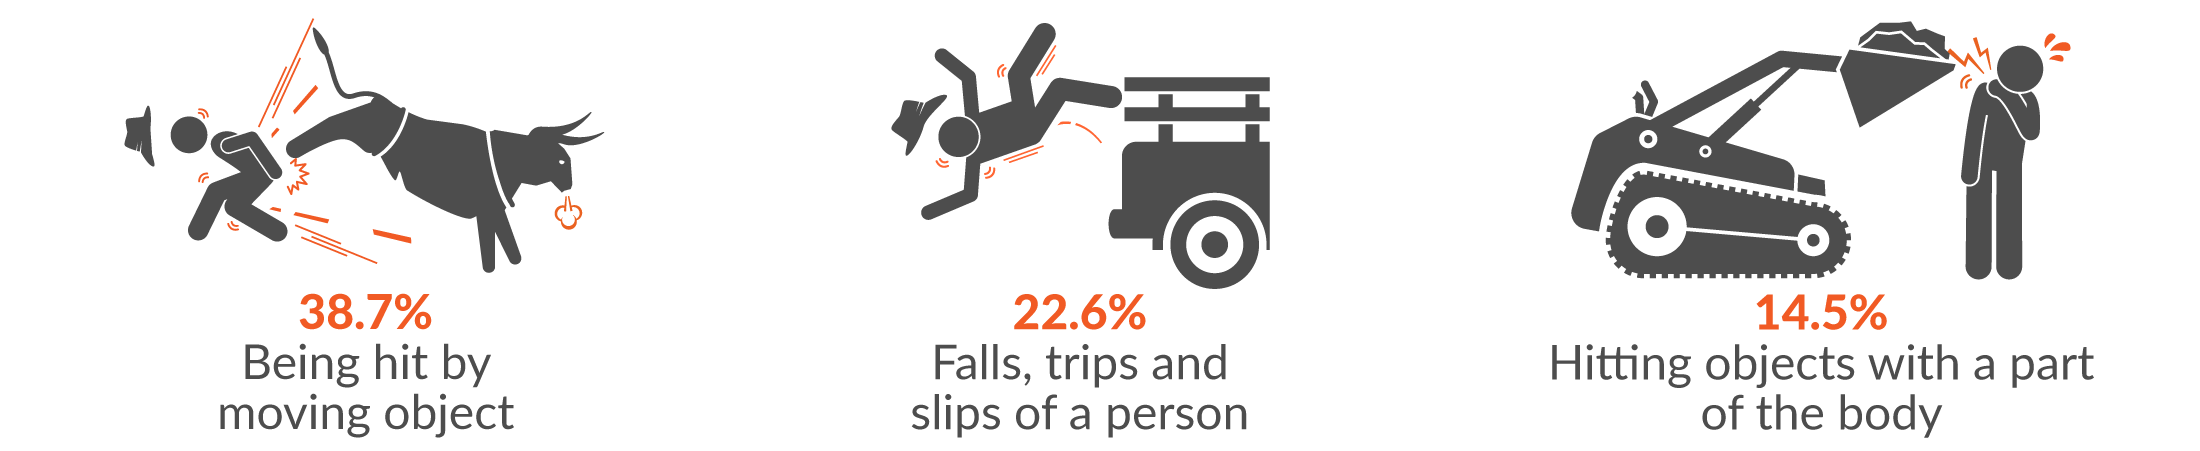 This infographic shows the main three mechanisms of serious injury for Agriculture, forestry and fishing claims were 38.7% being hit by moving object; 22.6% falls, trips and slips of a person; and 14.5% hitting objects with a part of the body.